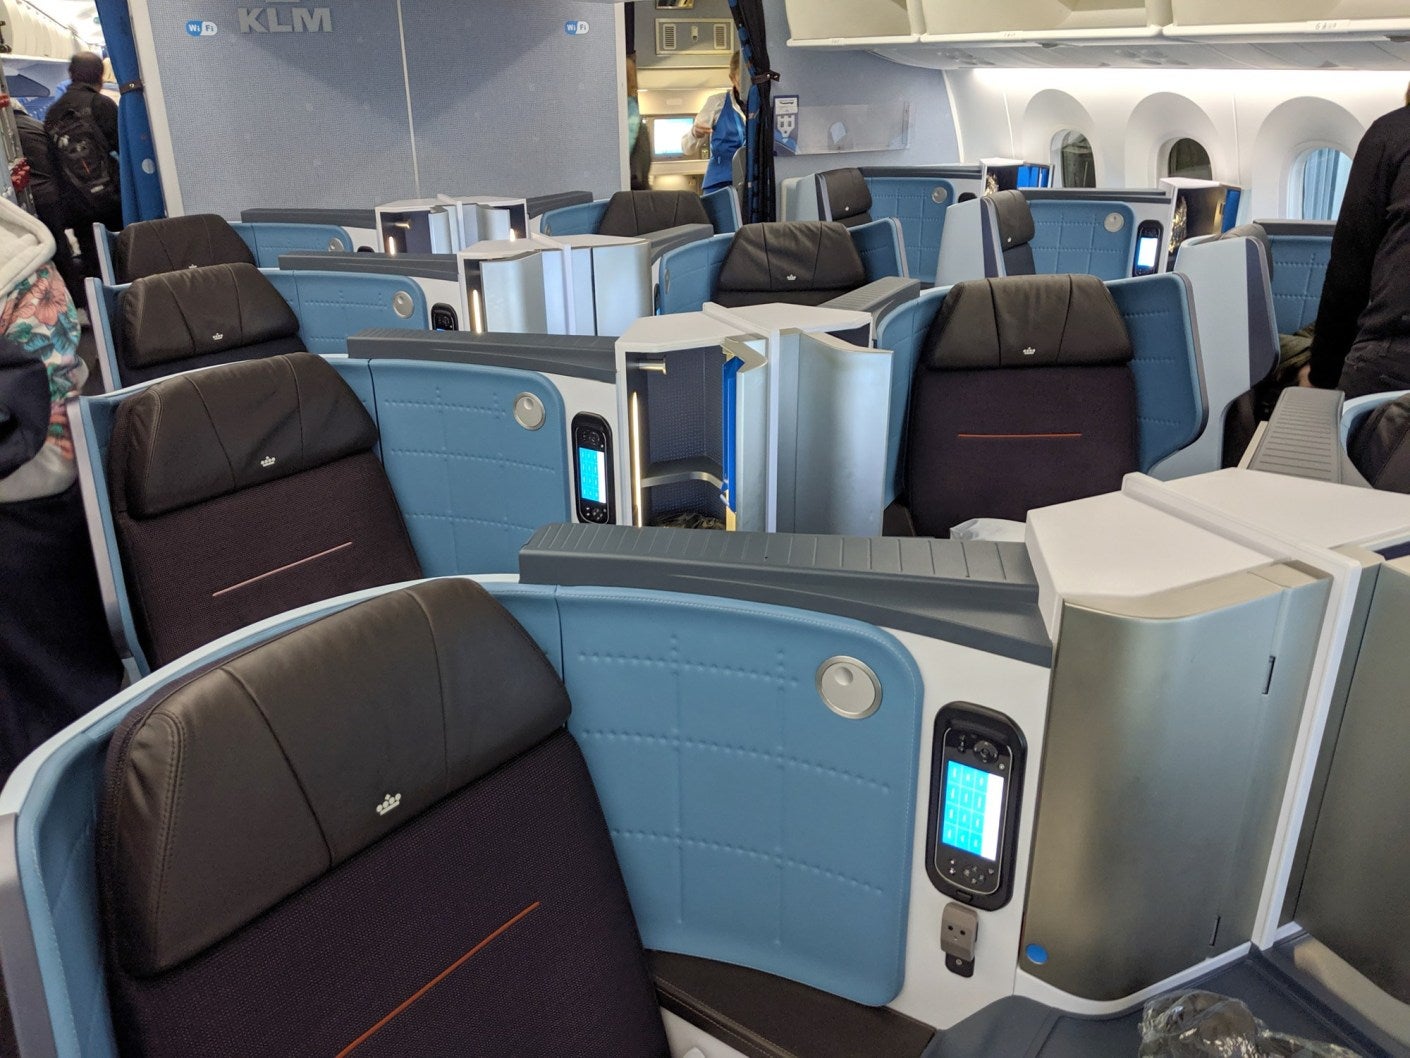 Review Klms Biz Class On The 787 9 Amsterdam To Toronto The Points Guy